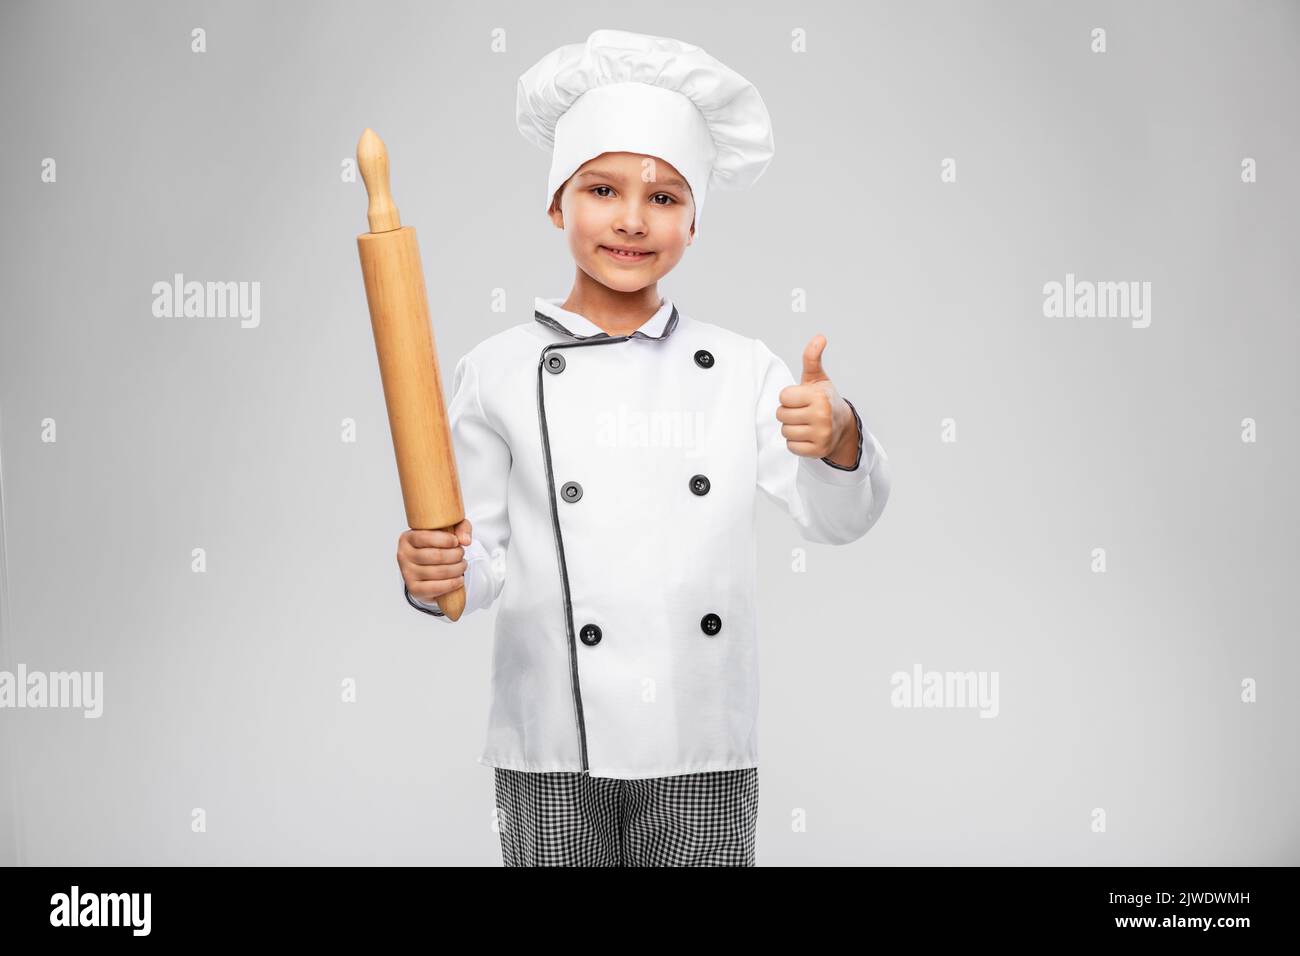 chef girl with rolling pin showing thumbs up Stock Photo